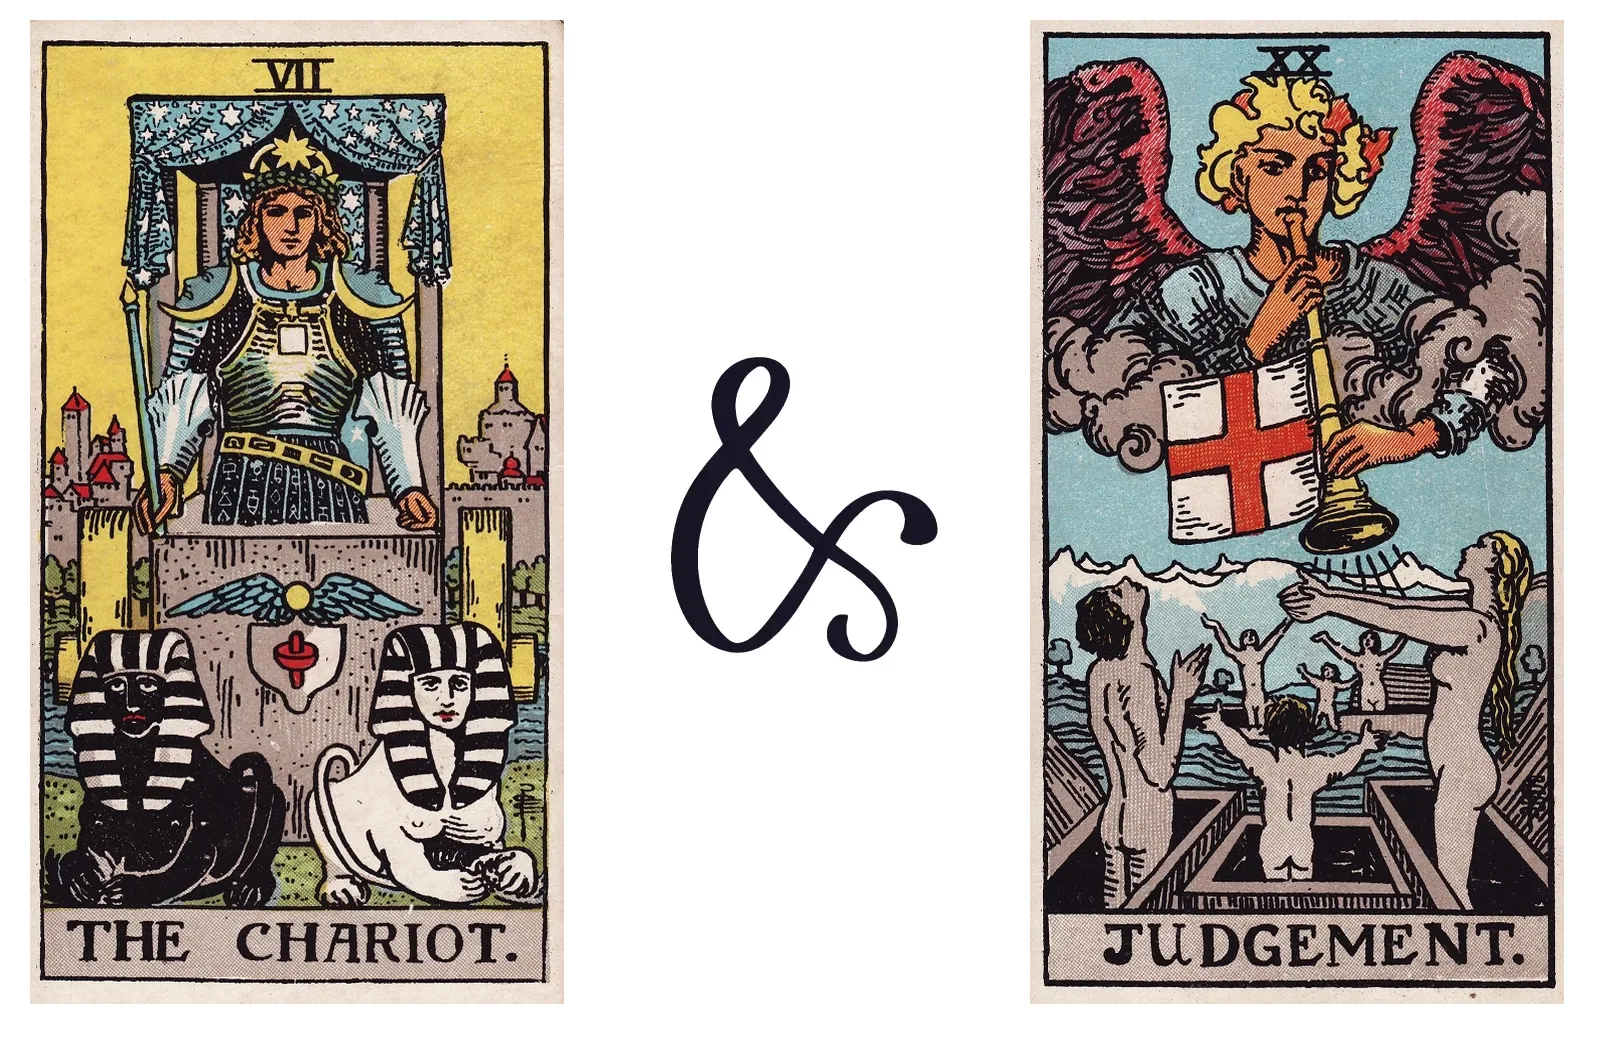 The Chariot and Judgement